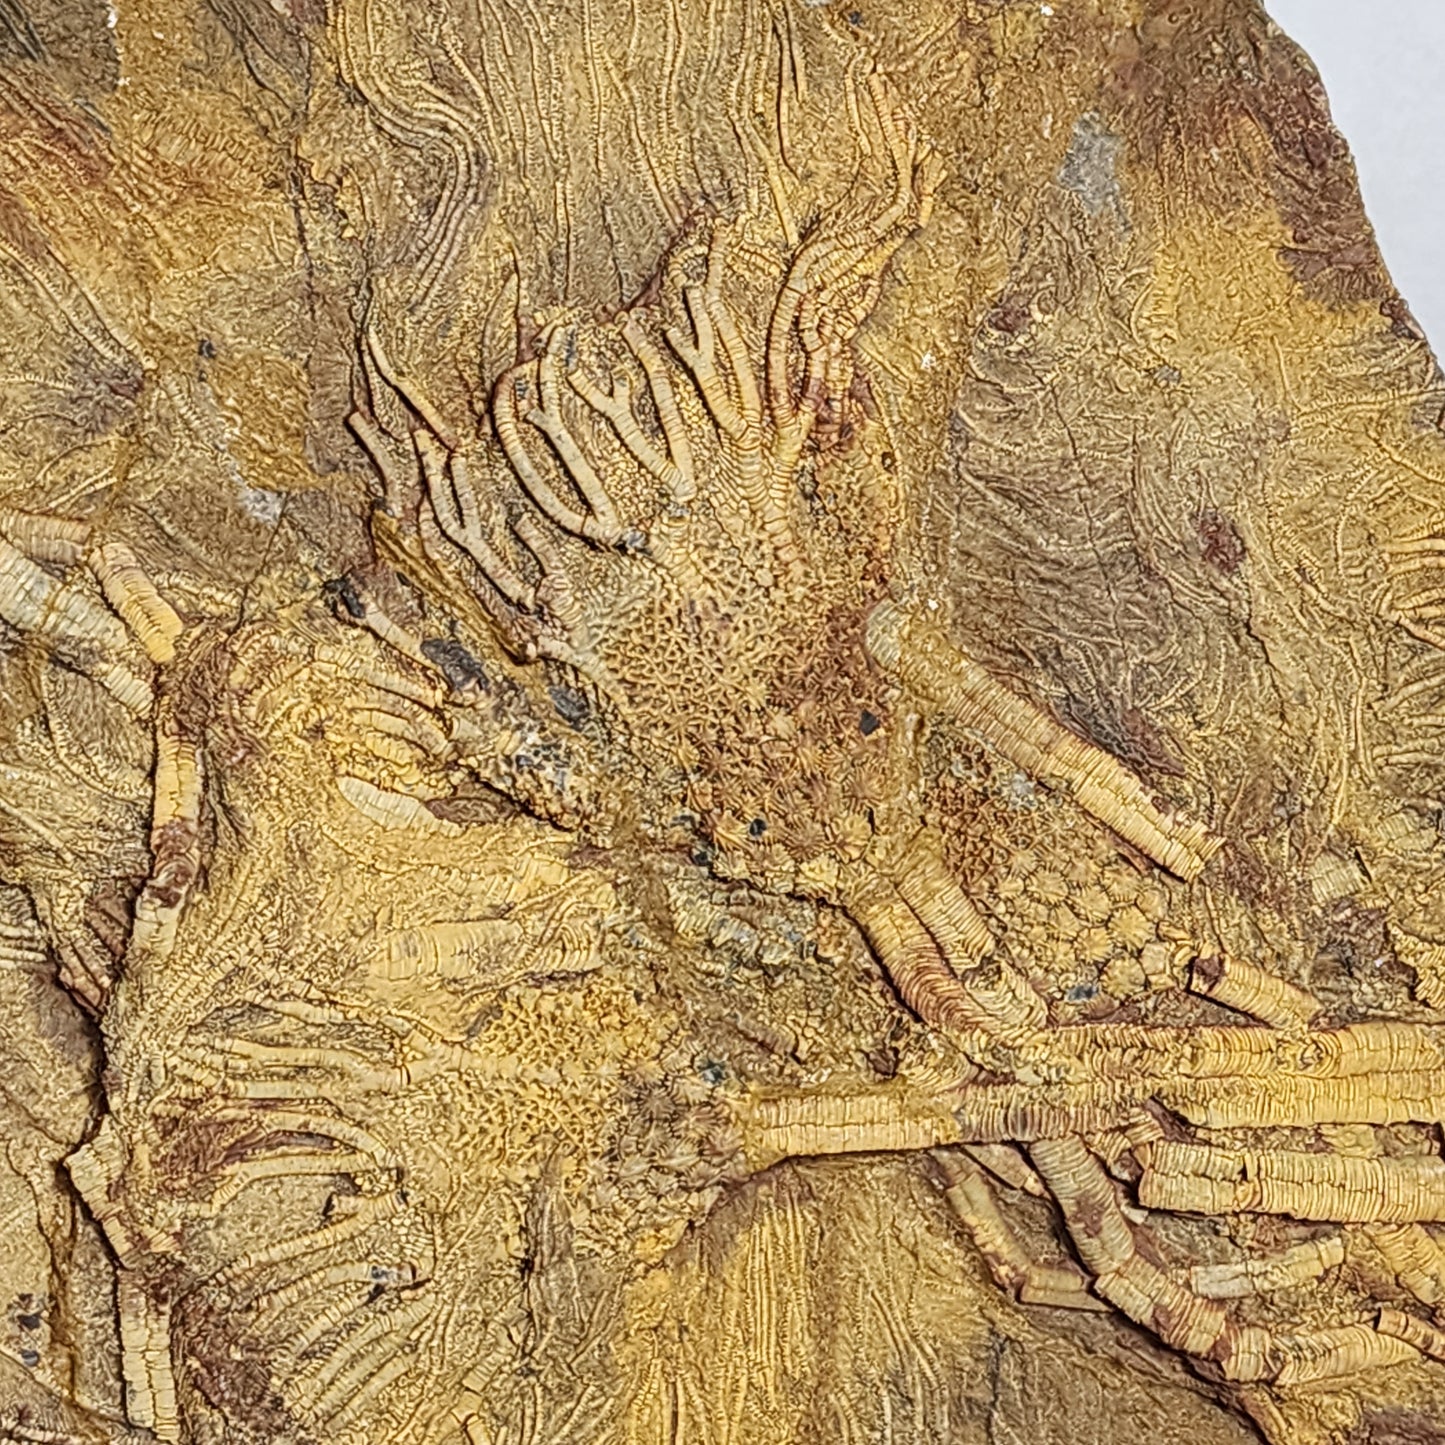 Eye-Catching Crinoid Plate from Morocco